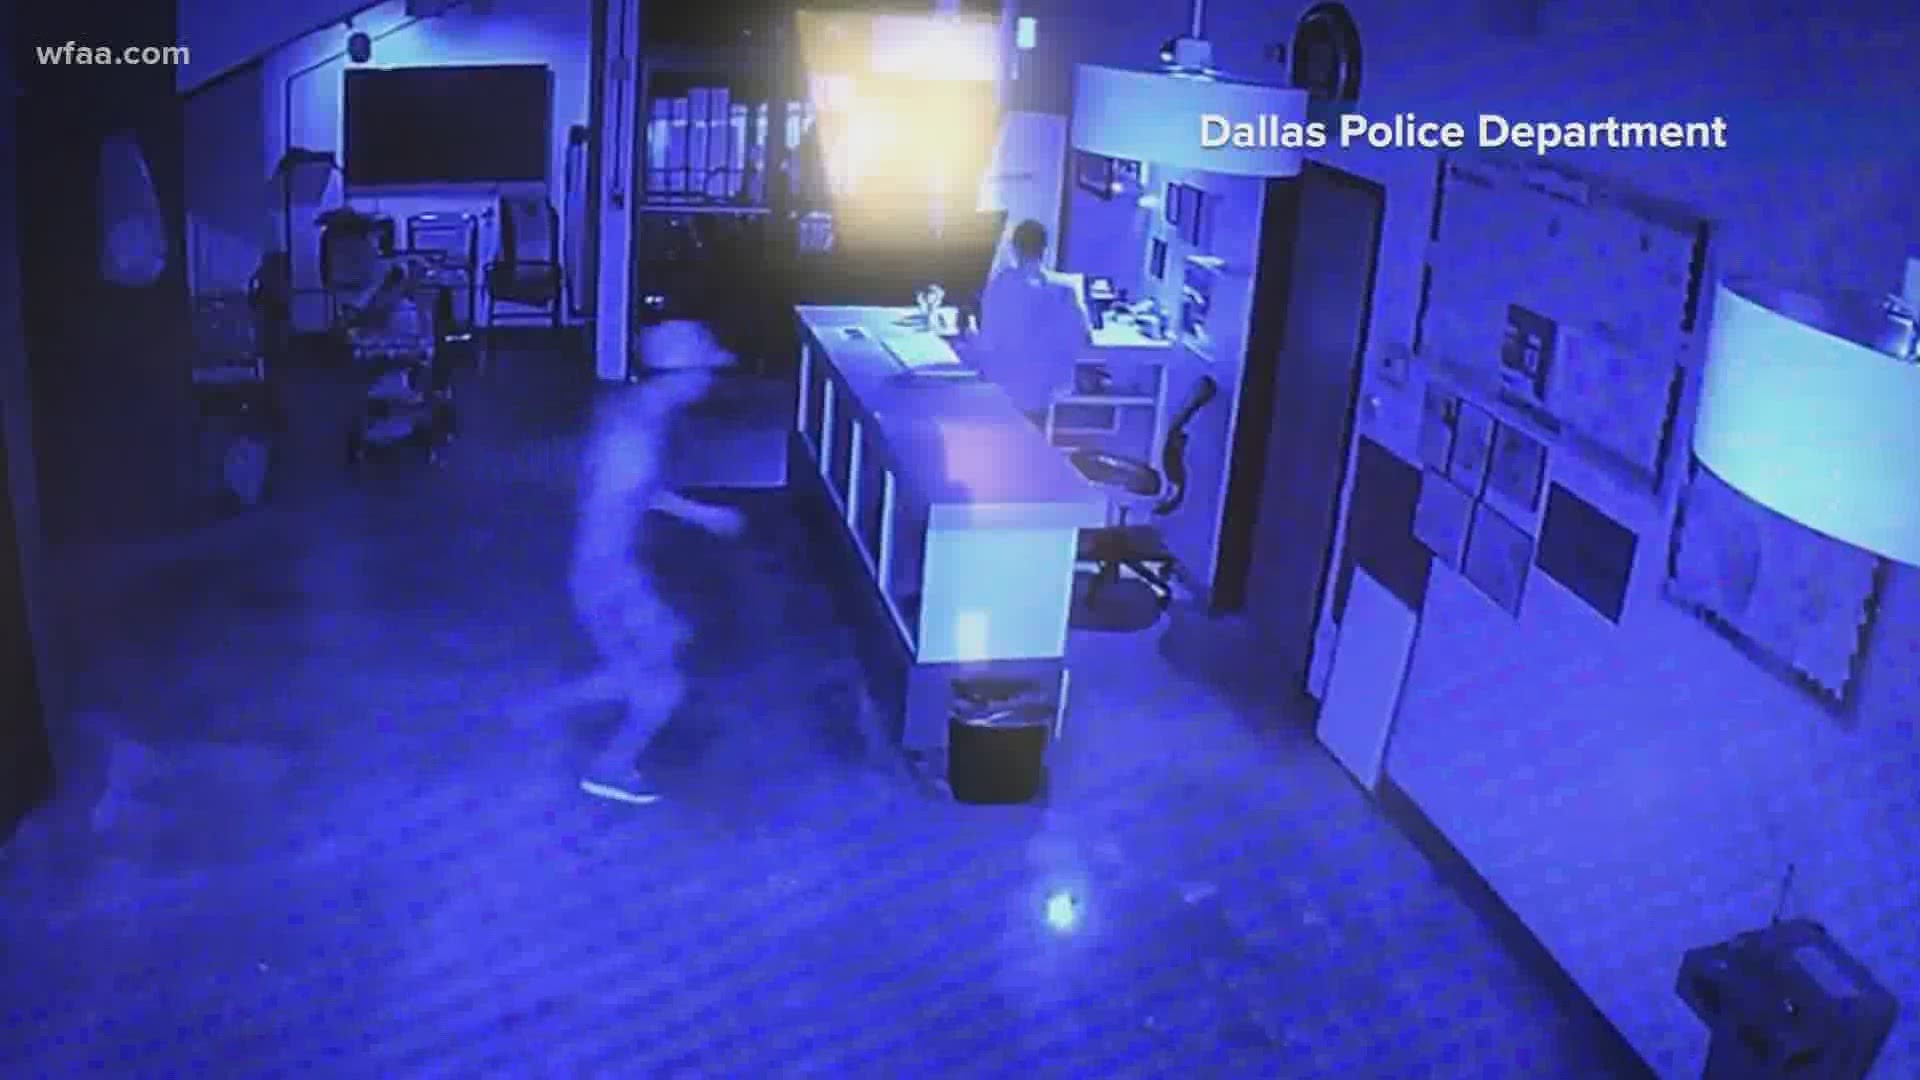 Dallas police believe the suspects are linked to several break-ins and burglaries at community centers.